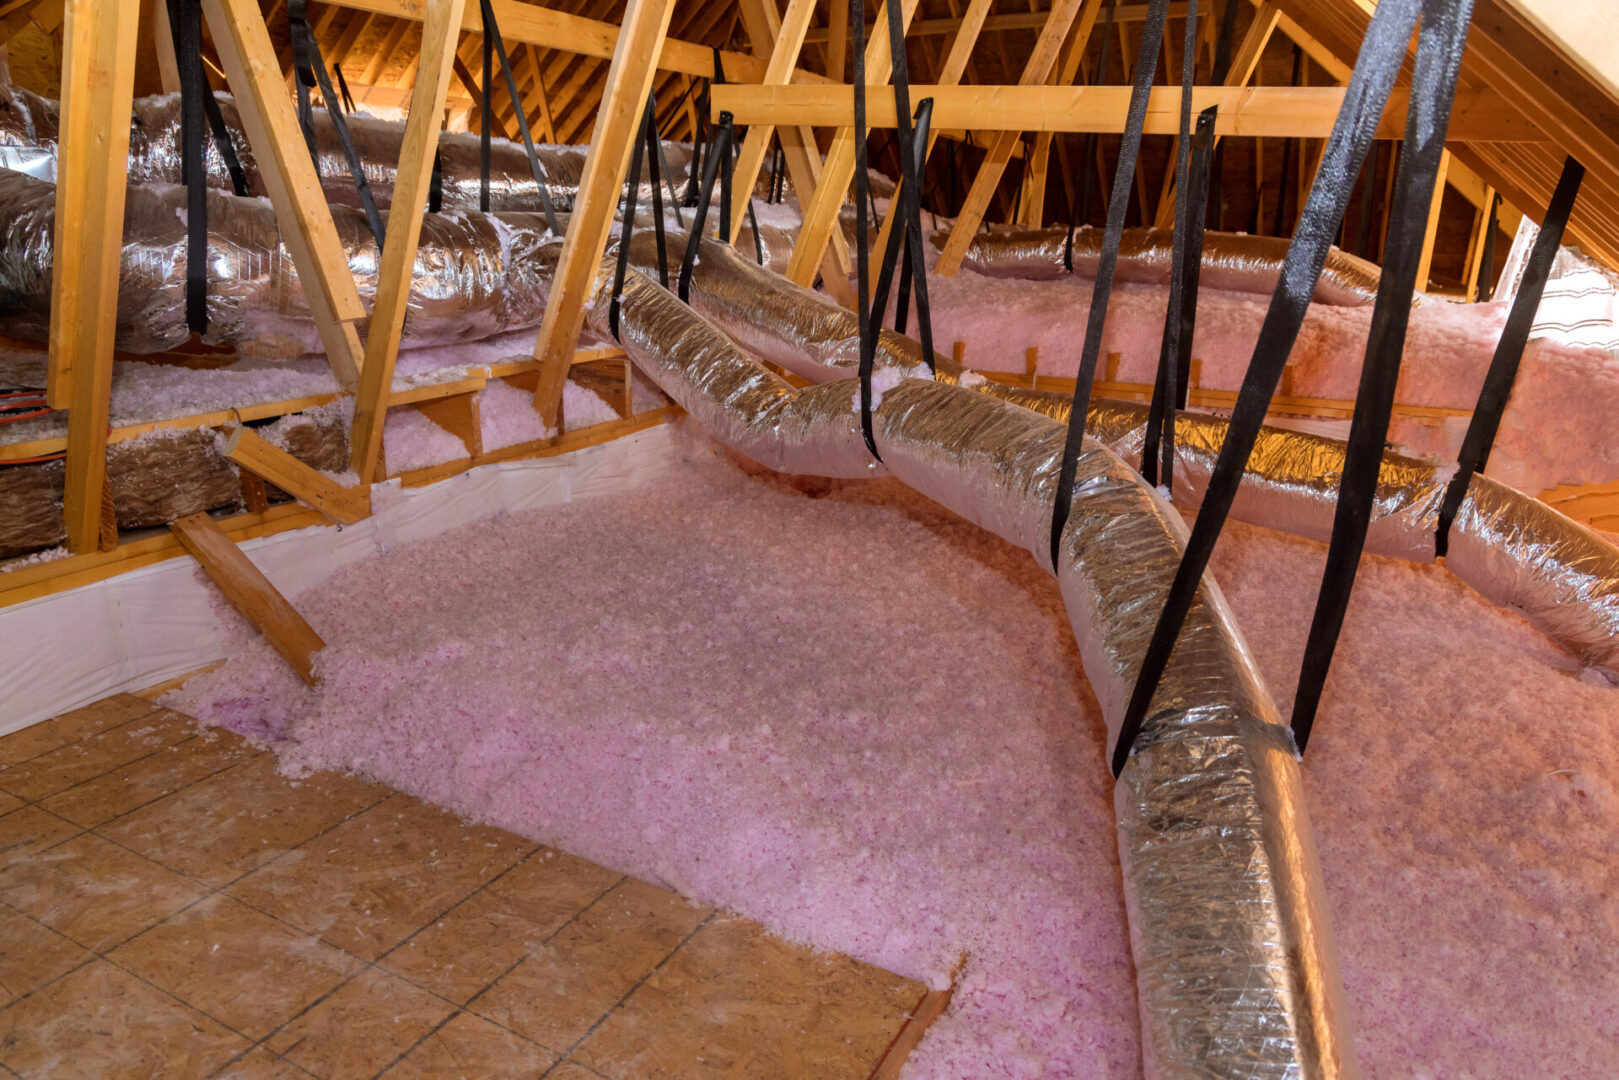 Eco wool insulation is poured in the attic insulation roof for new home